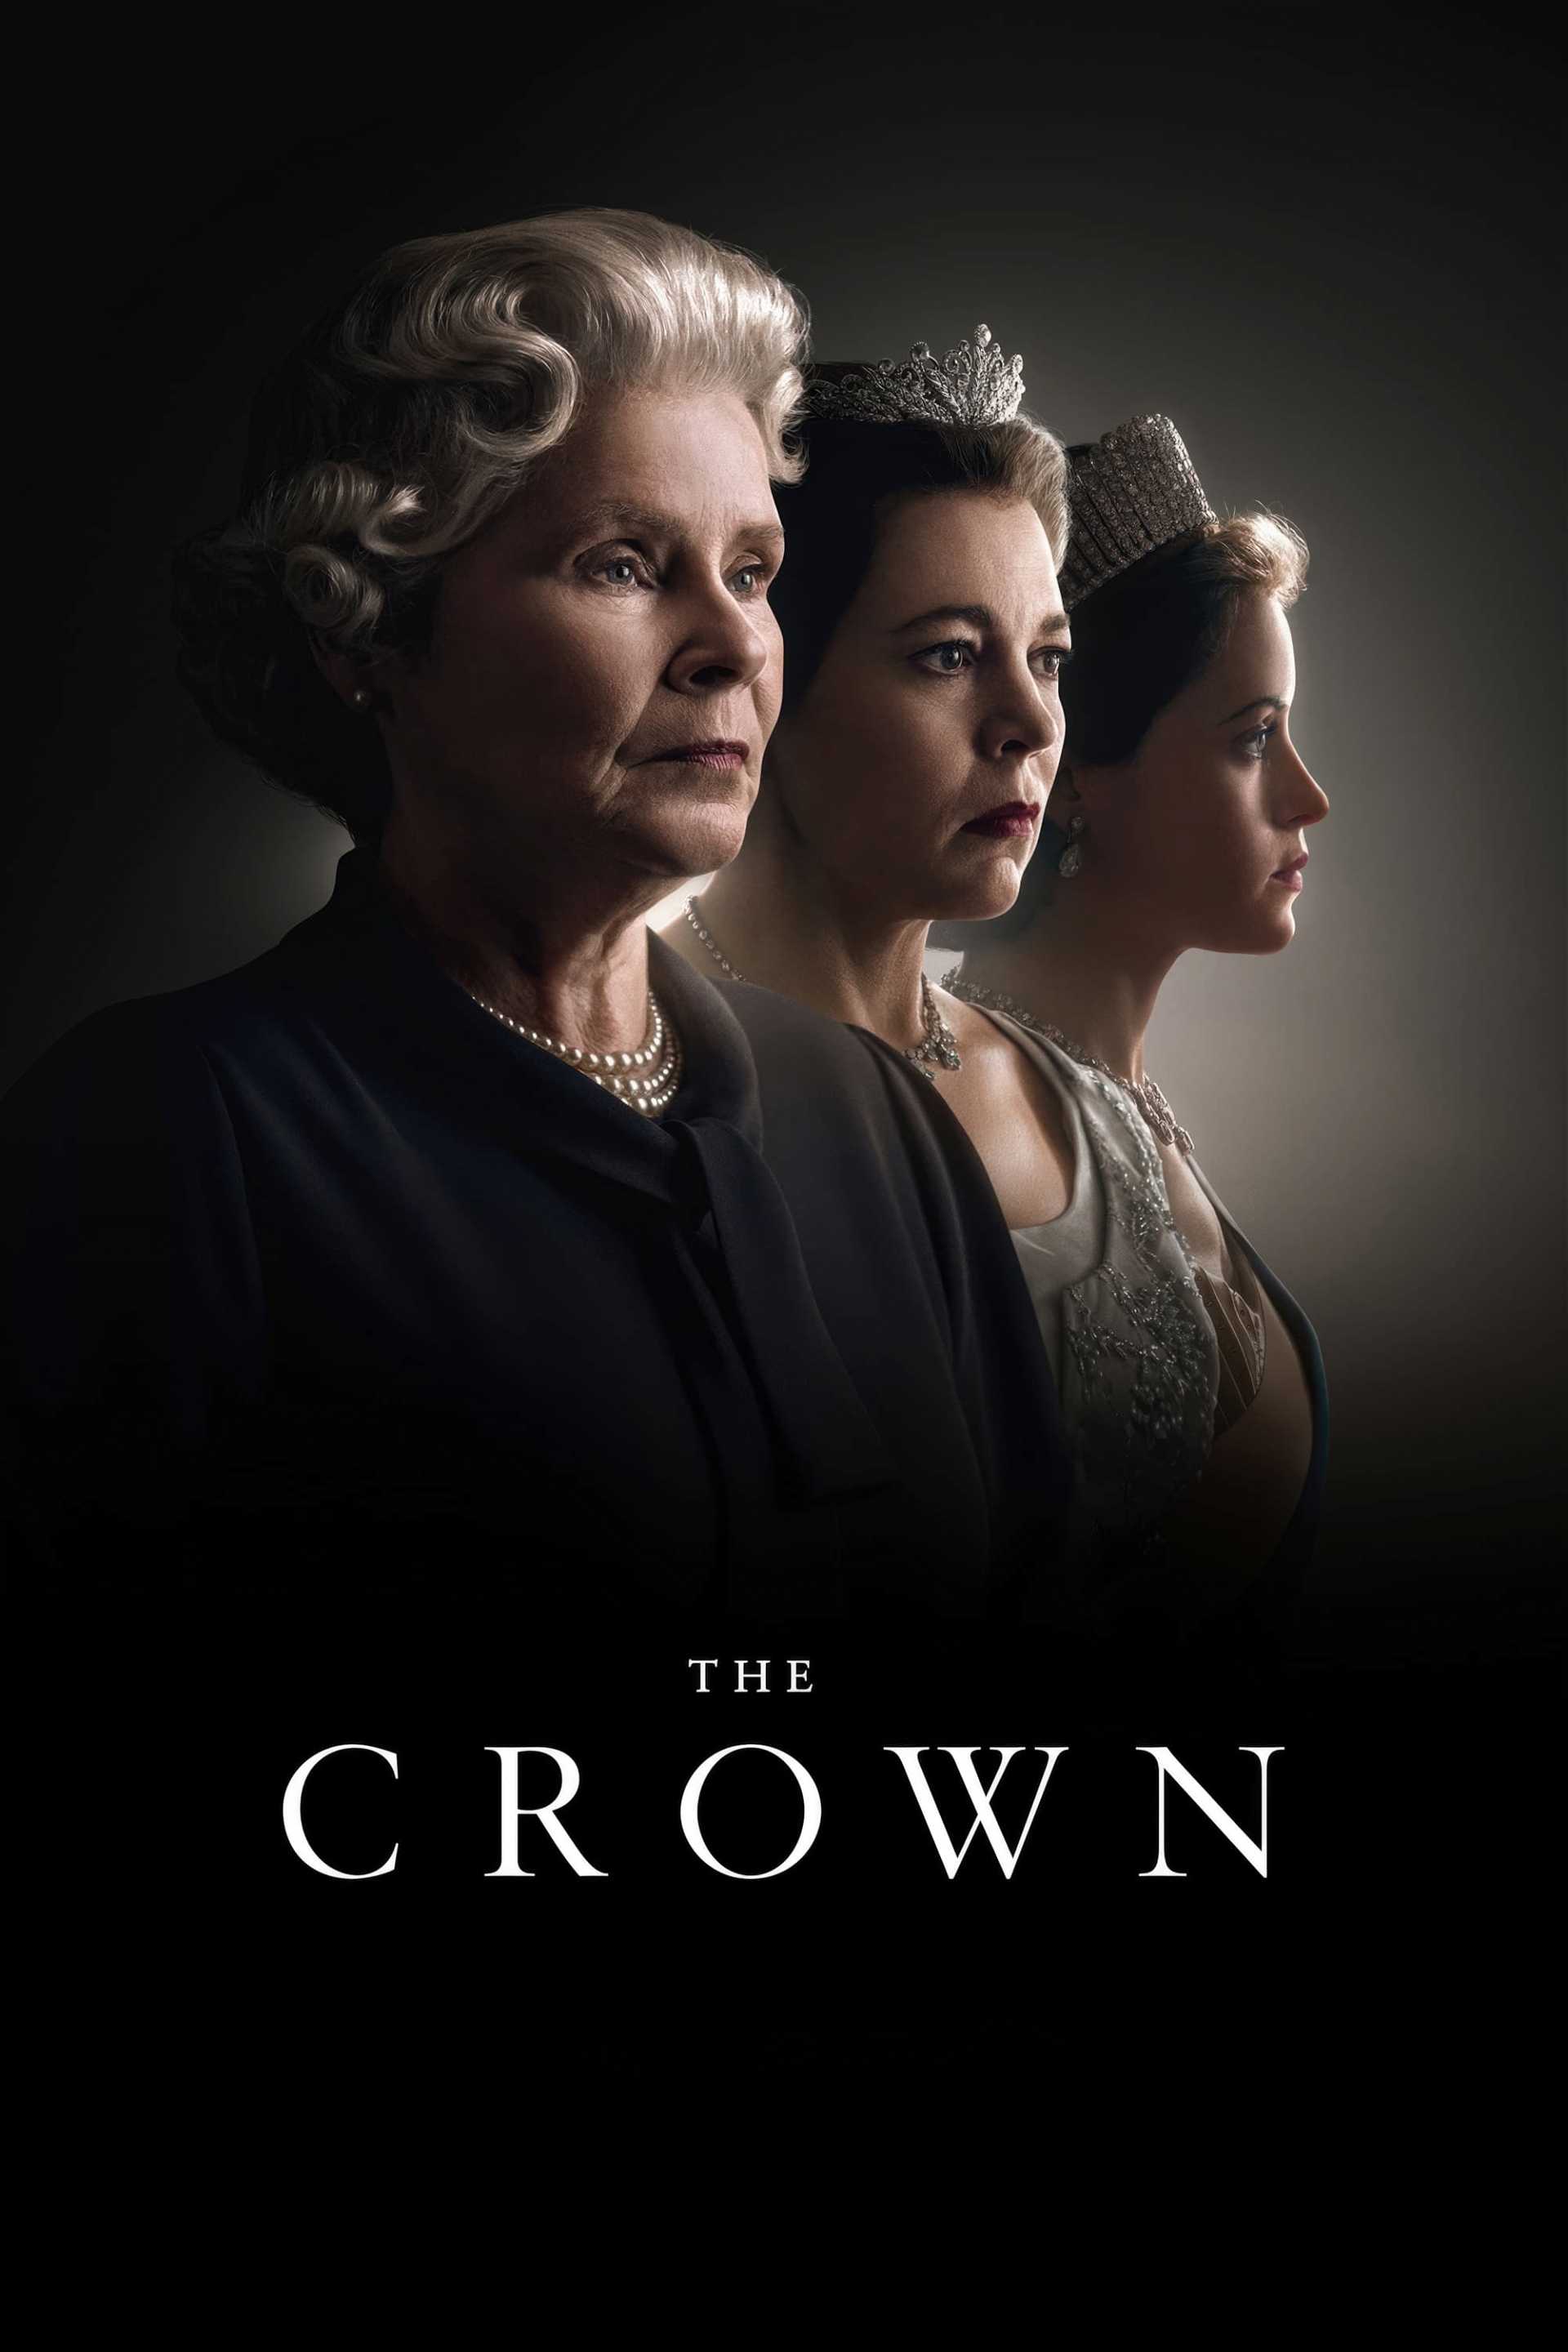 The Crown in streaming